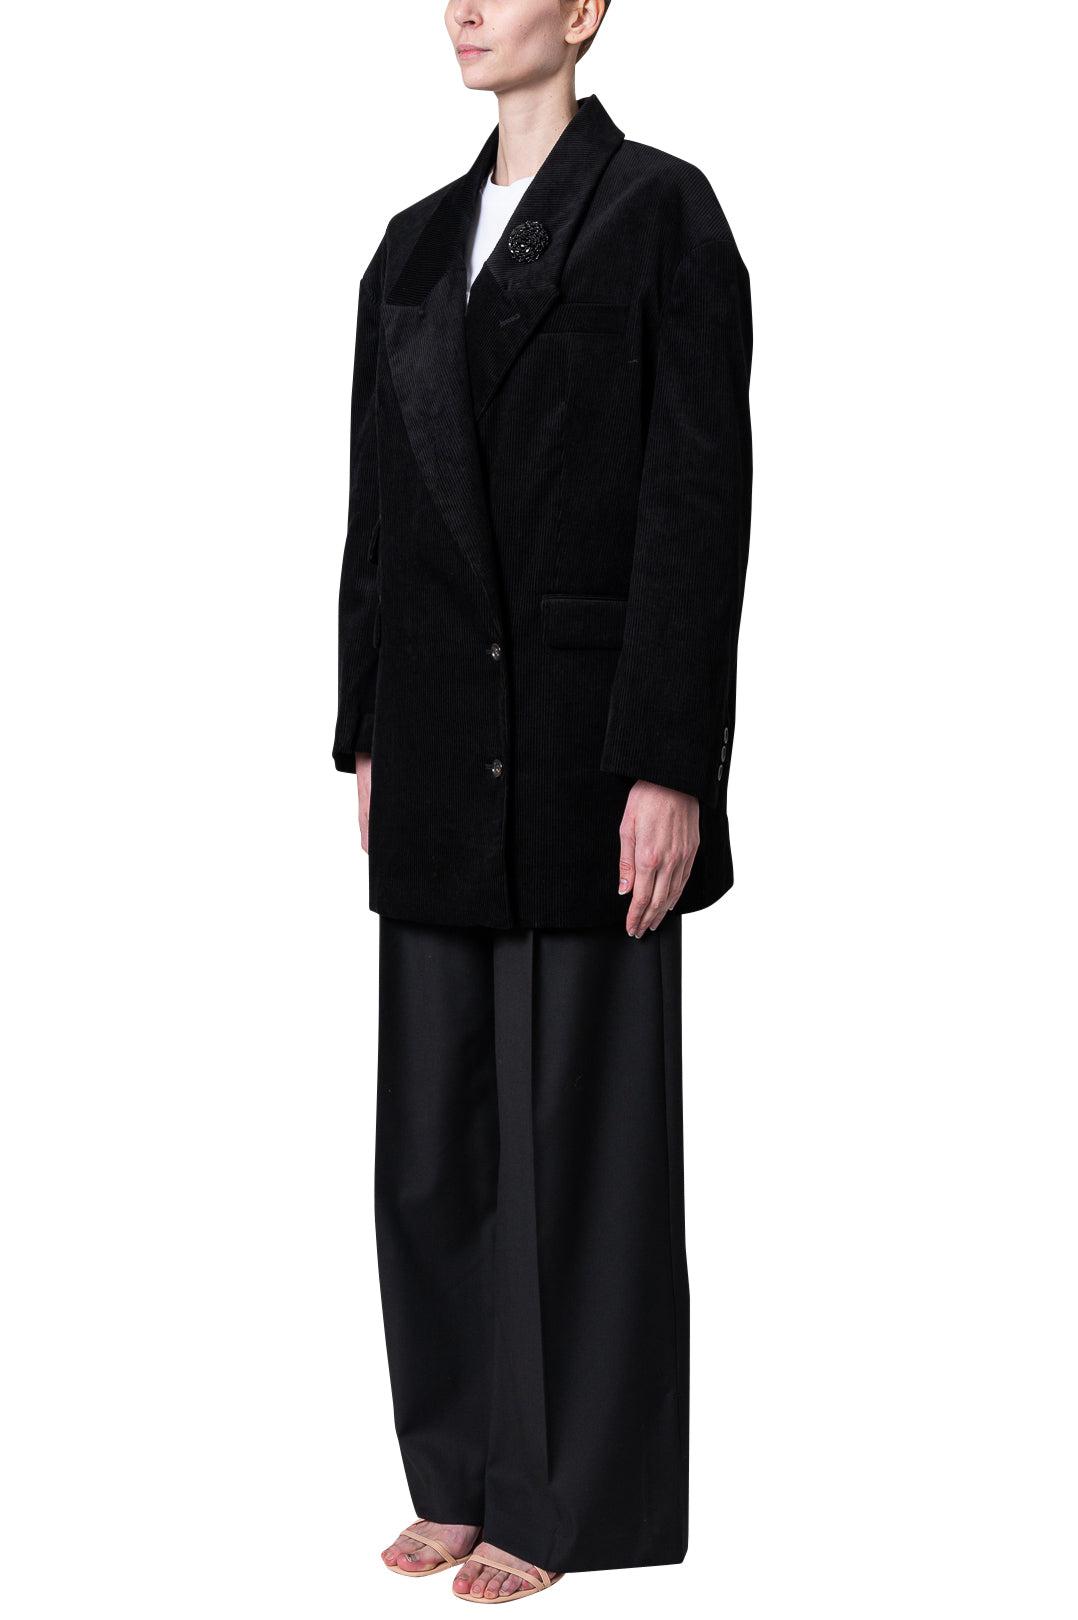 The Garment-Cannes Oversized Coat-19985-dgallerystore